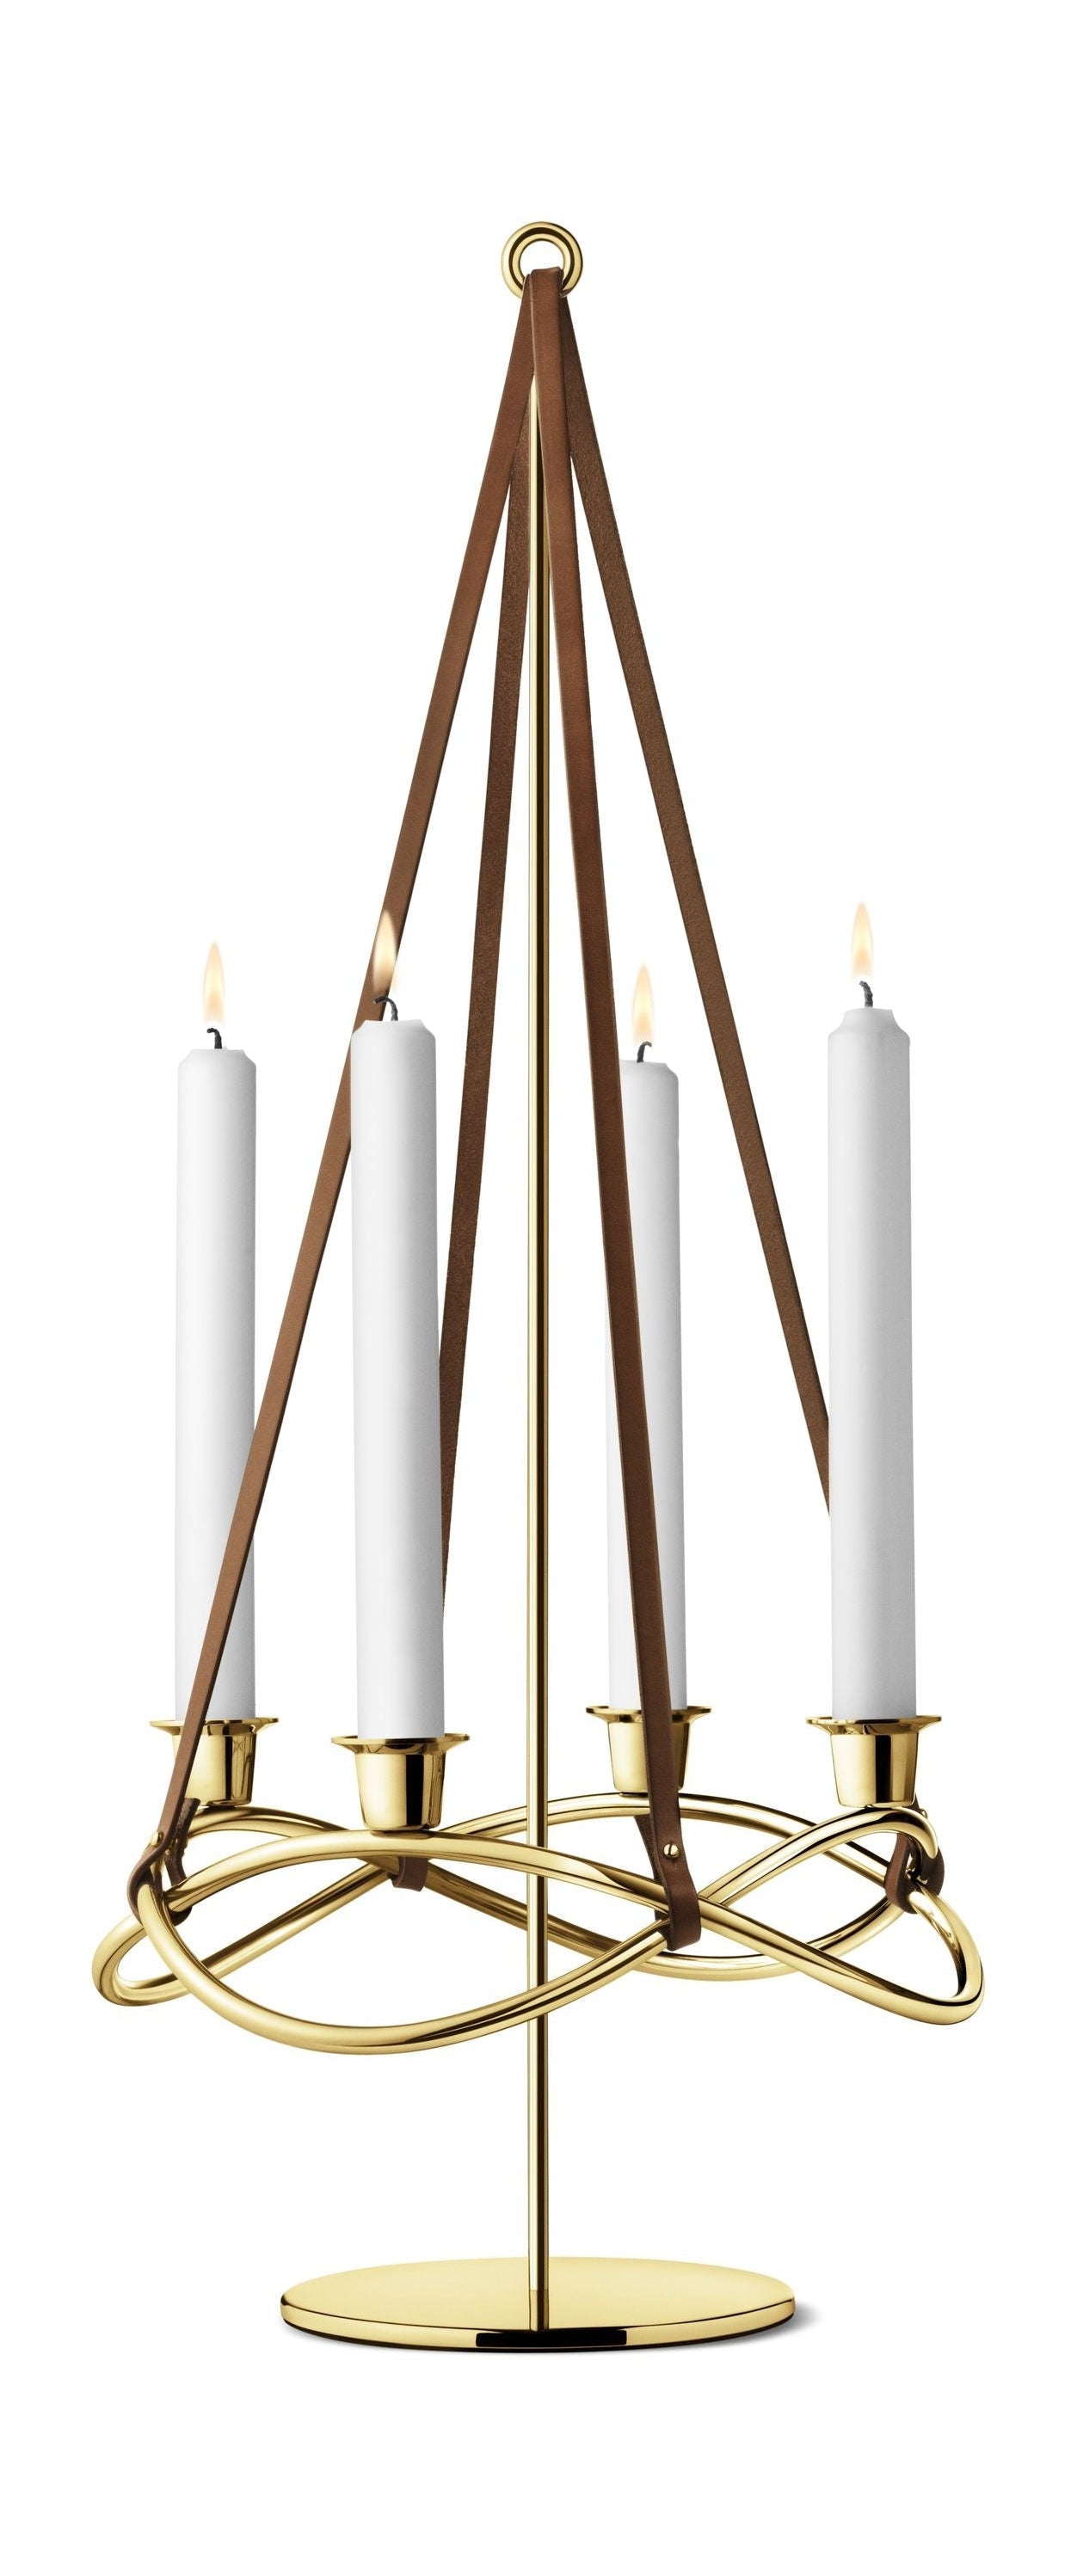 Georg Jensen Season Attachment For Candle Holder, Gold Plating